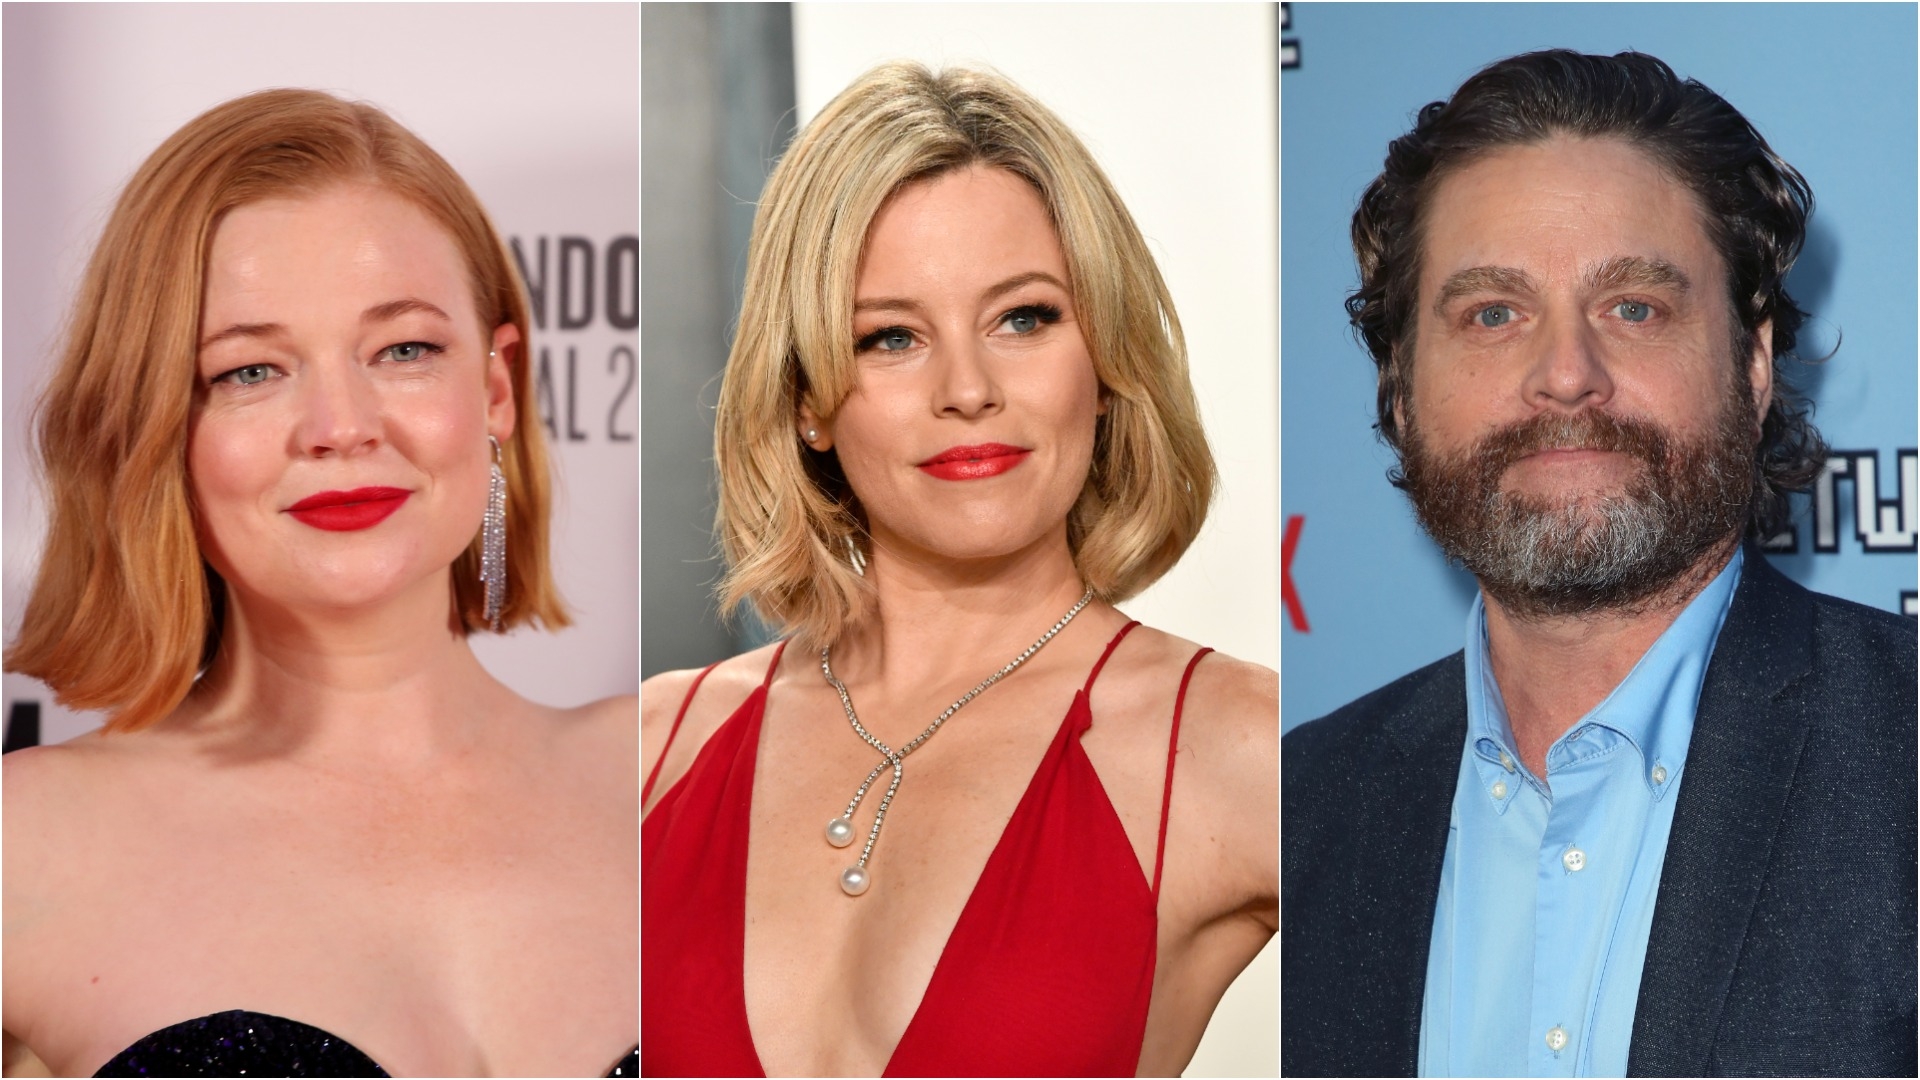 Zach Galifianakis, Elizabeth Banks, and Sarah Snook to star in Apple’s The Beanie Bubble